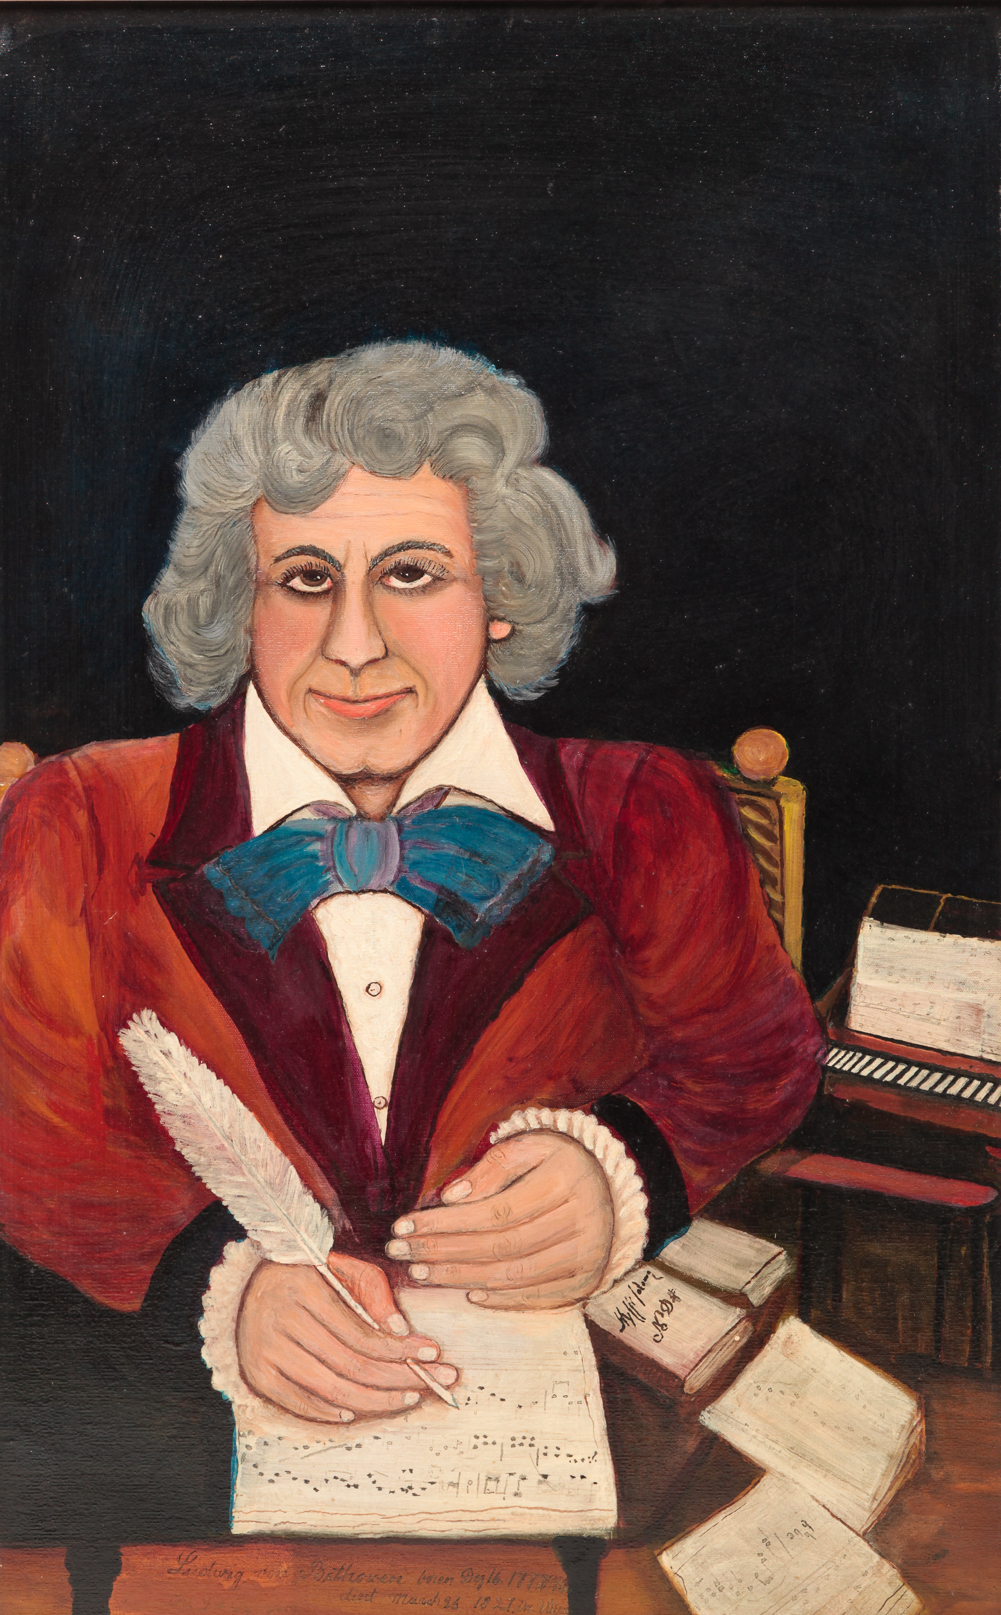 PORTRAIT OF BEETHOVEN BY FREDERICK